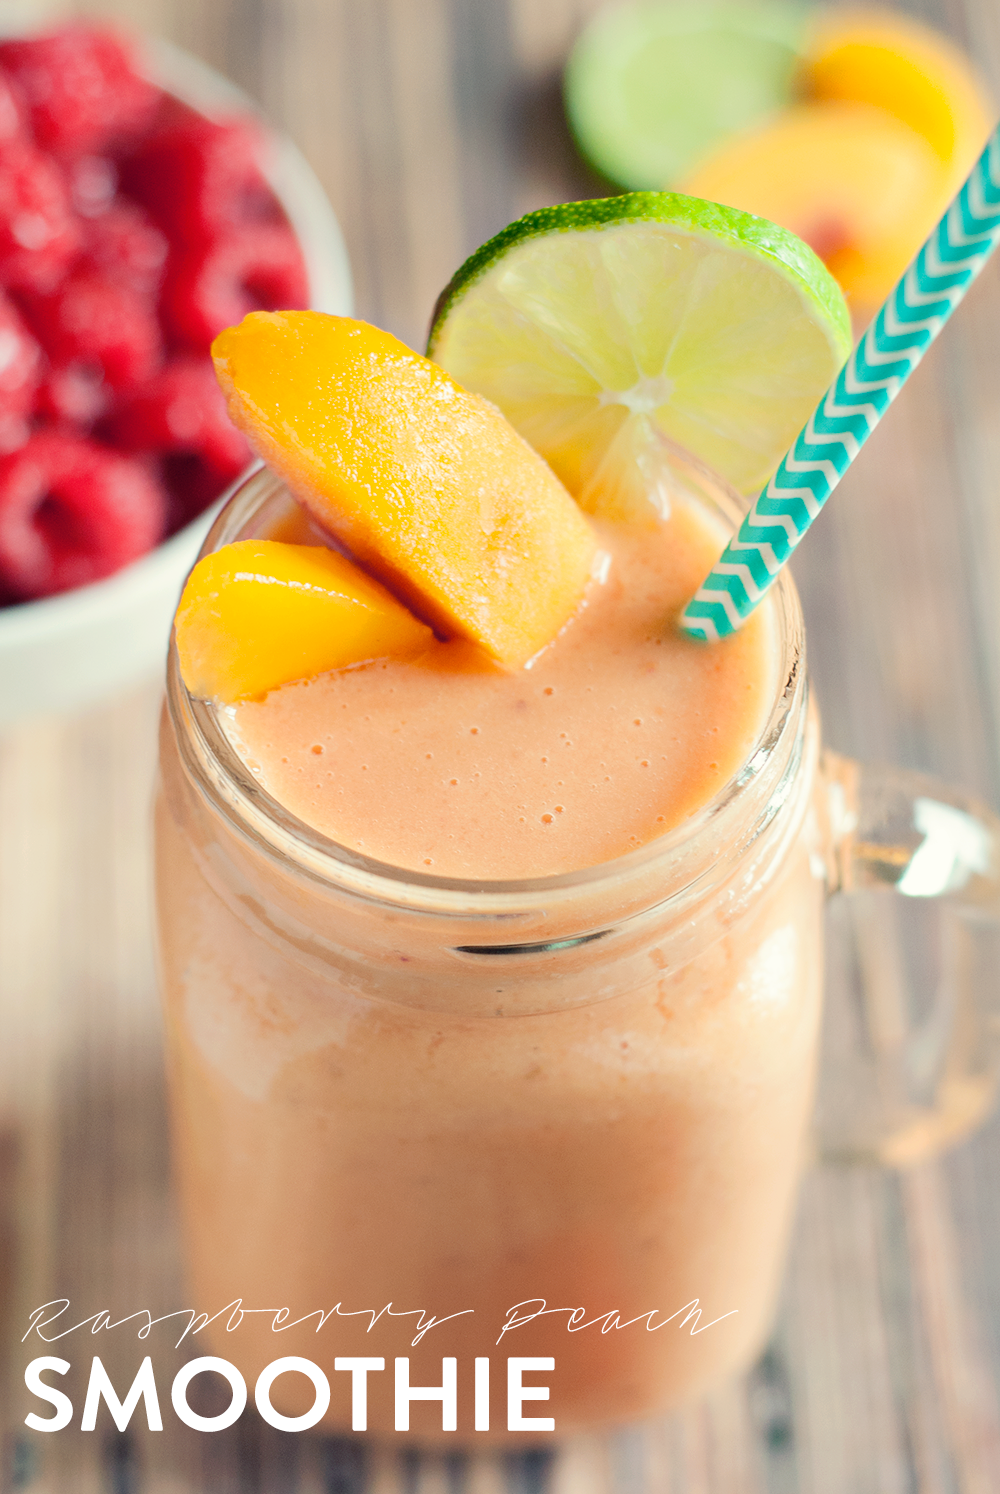 This easy peach raspberry smoothie is creamy, delicious, and makes the perfect breakfast, snack, or treat! Yum!